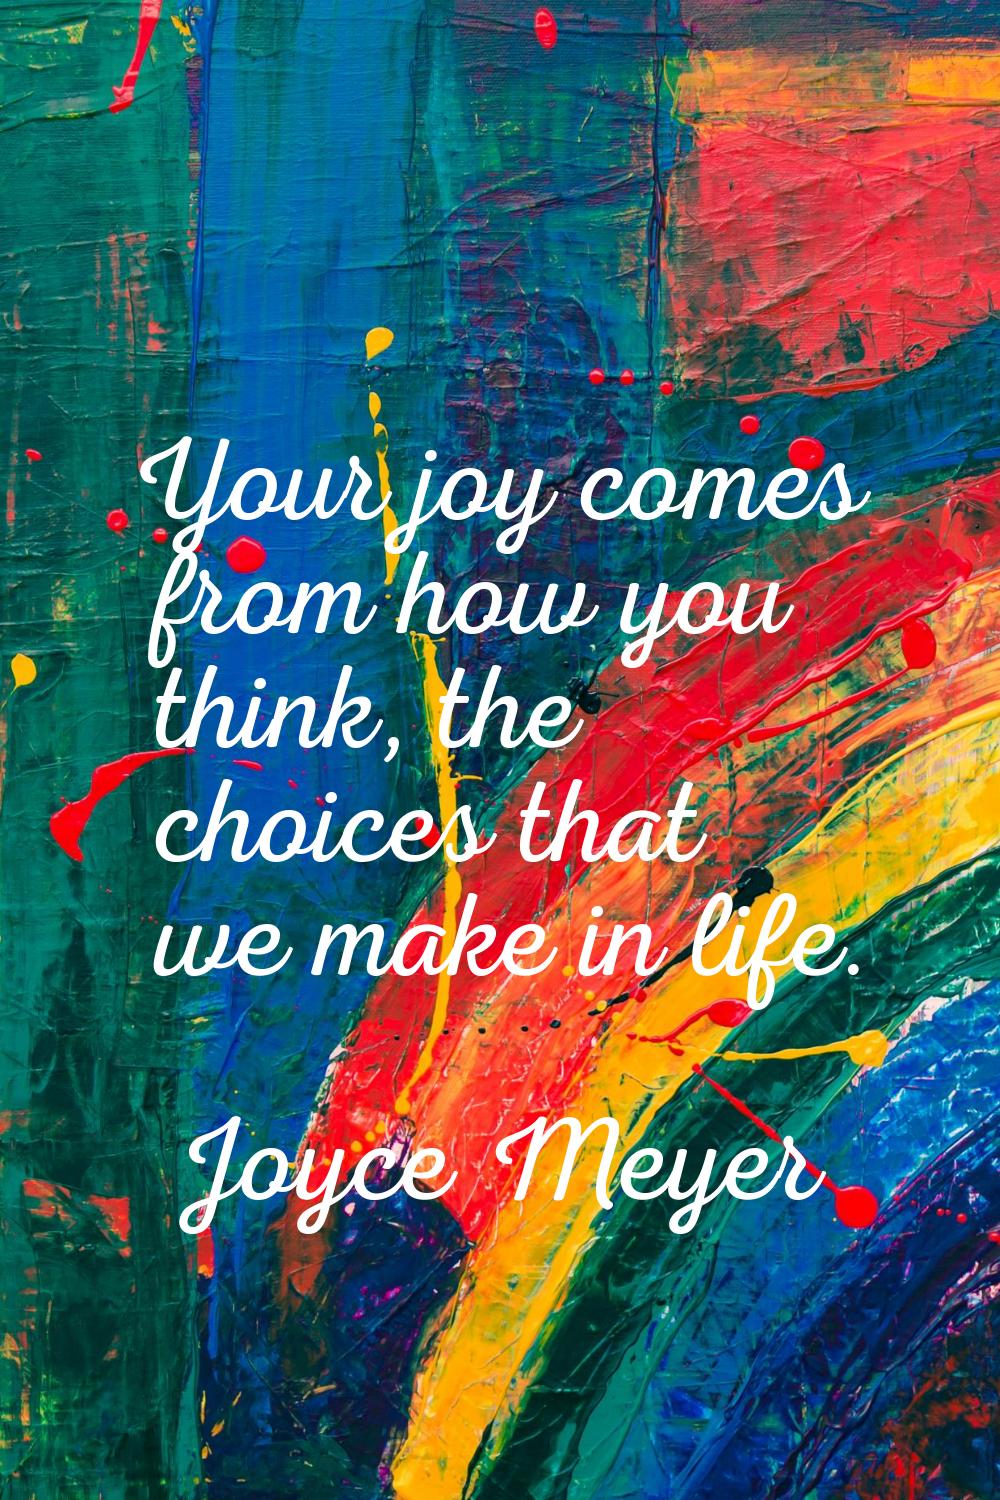 Your joy comes from how you think, the choices that we make in life.